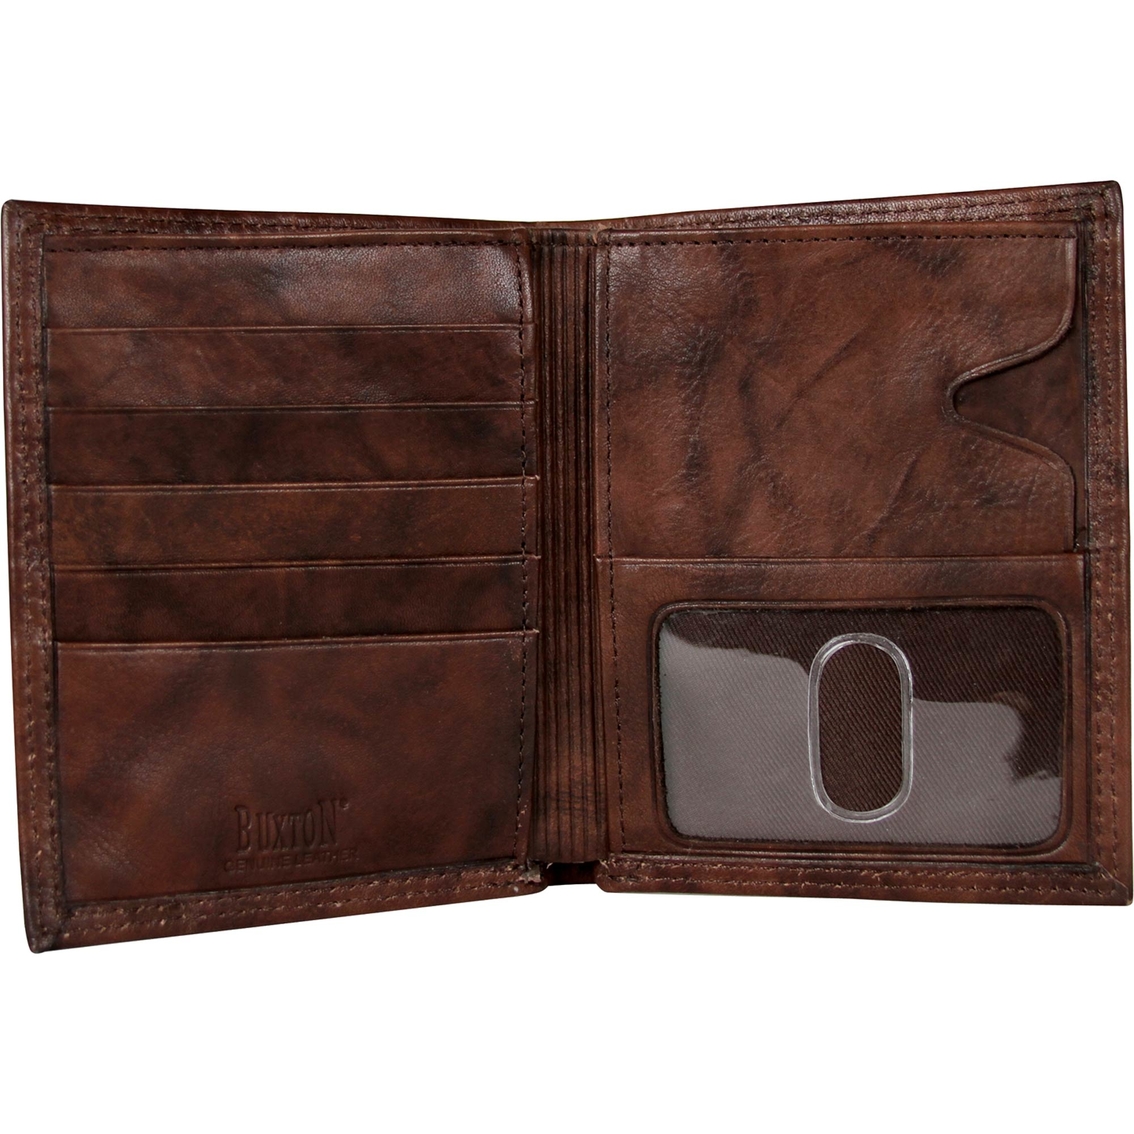 Buxton Hunt Collection Credit Card Folio | Wallets | Clothing ...